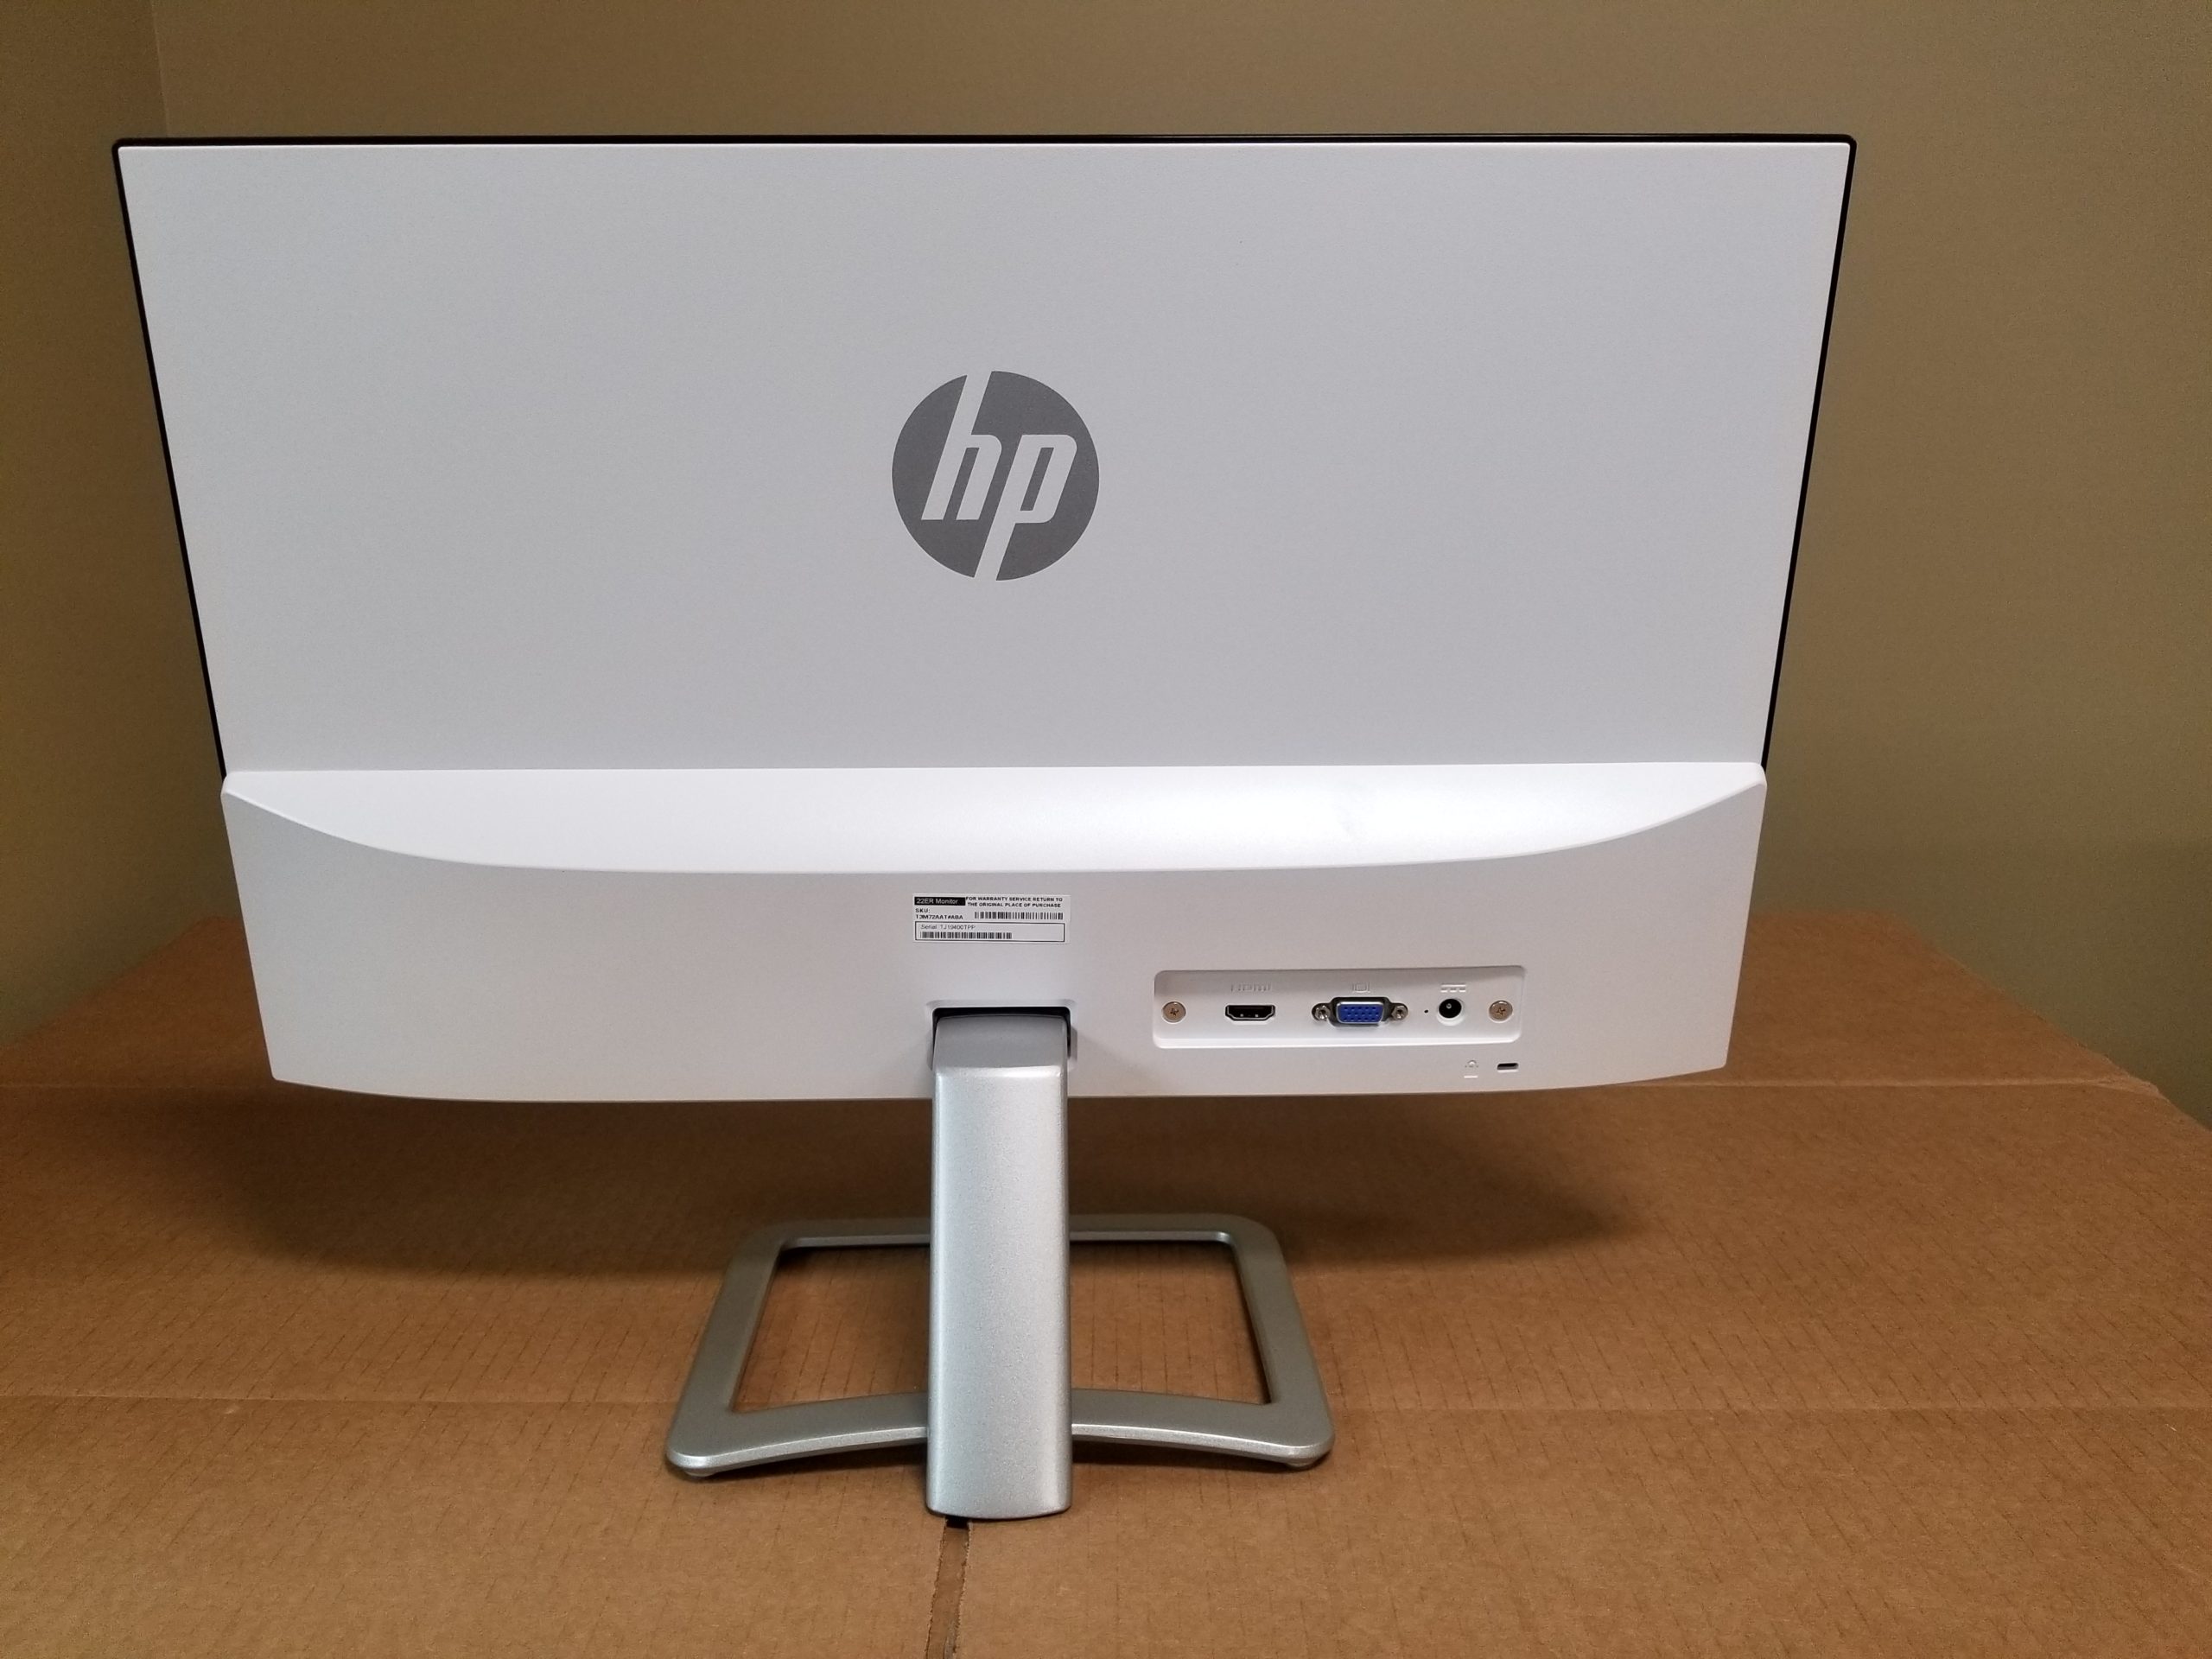 hp 22er 21.5-inch Display Monitor - タブレット